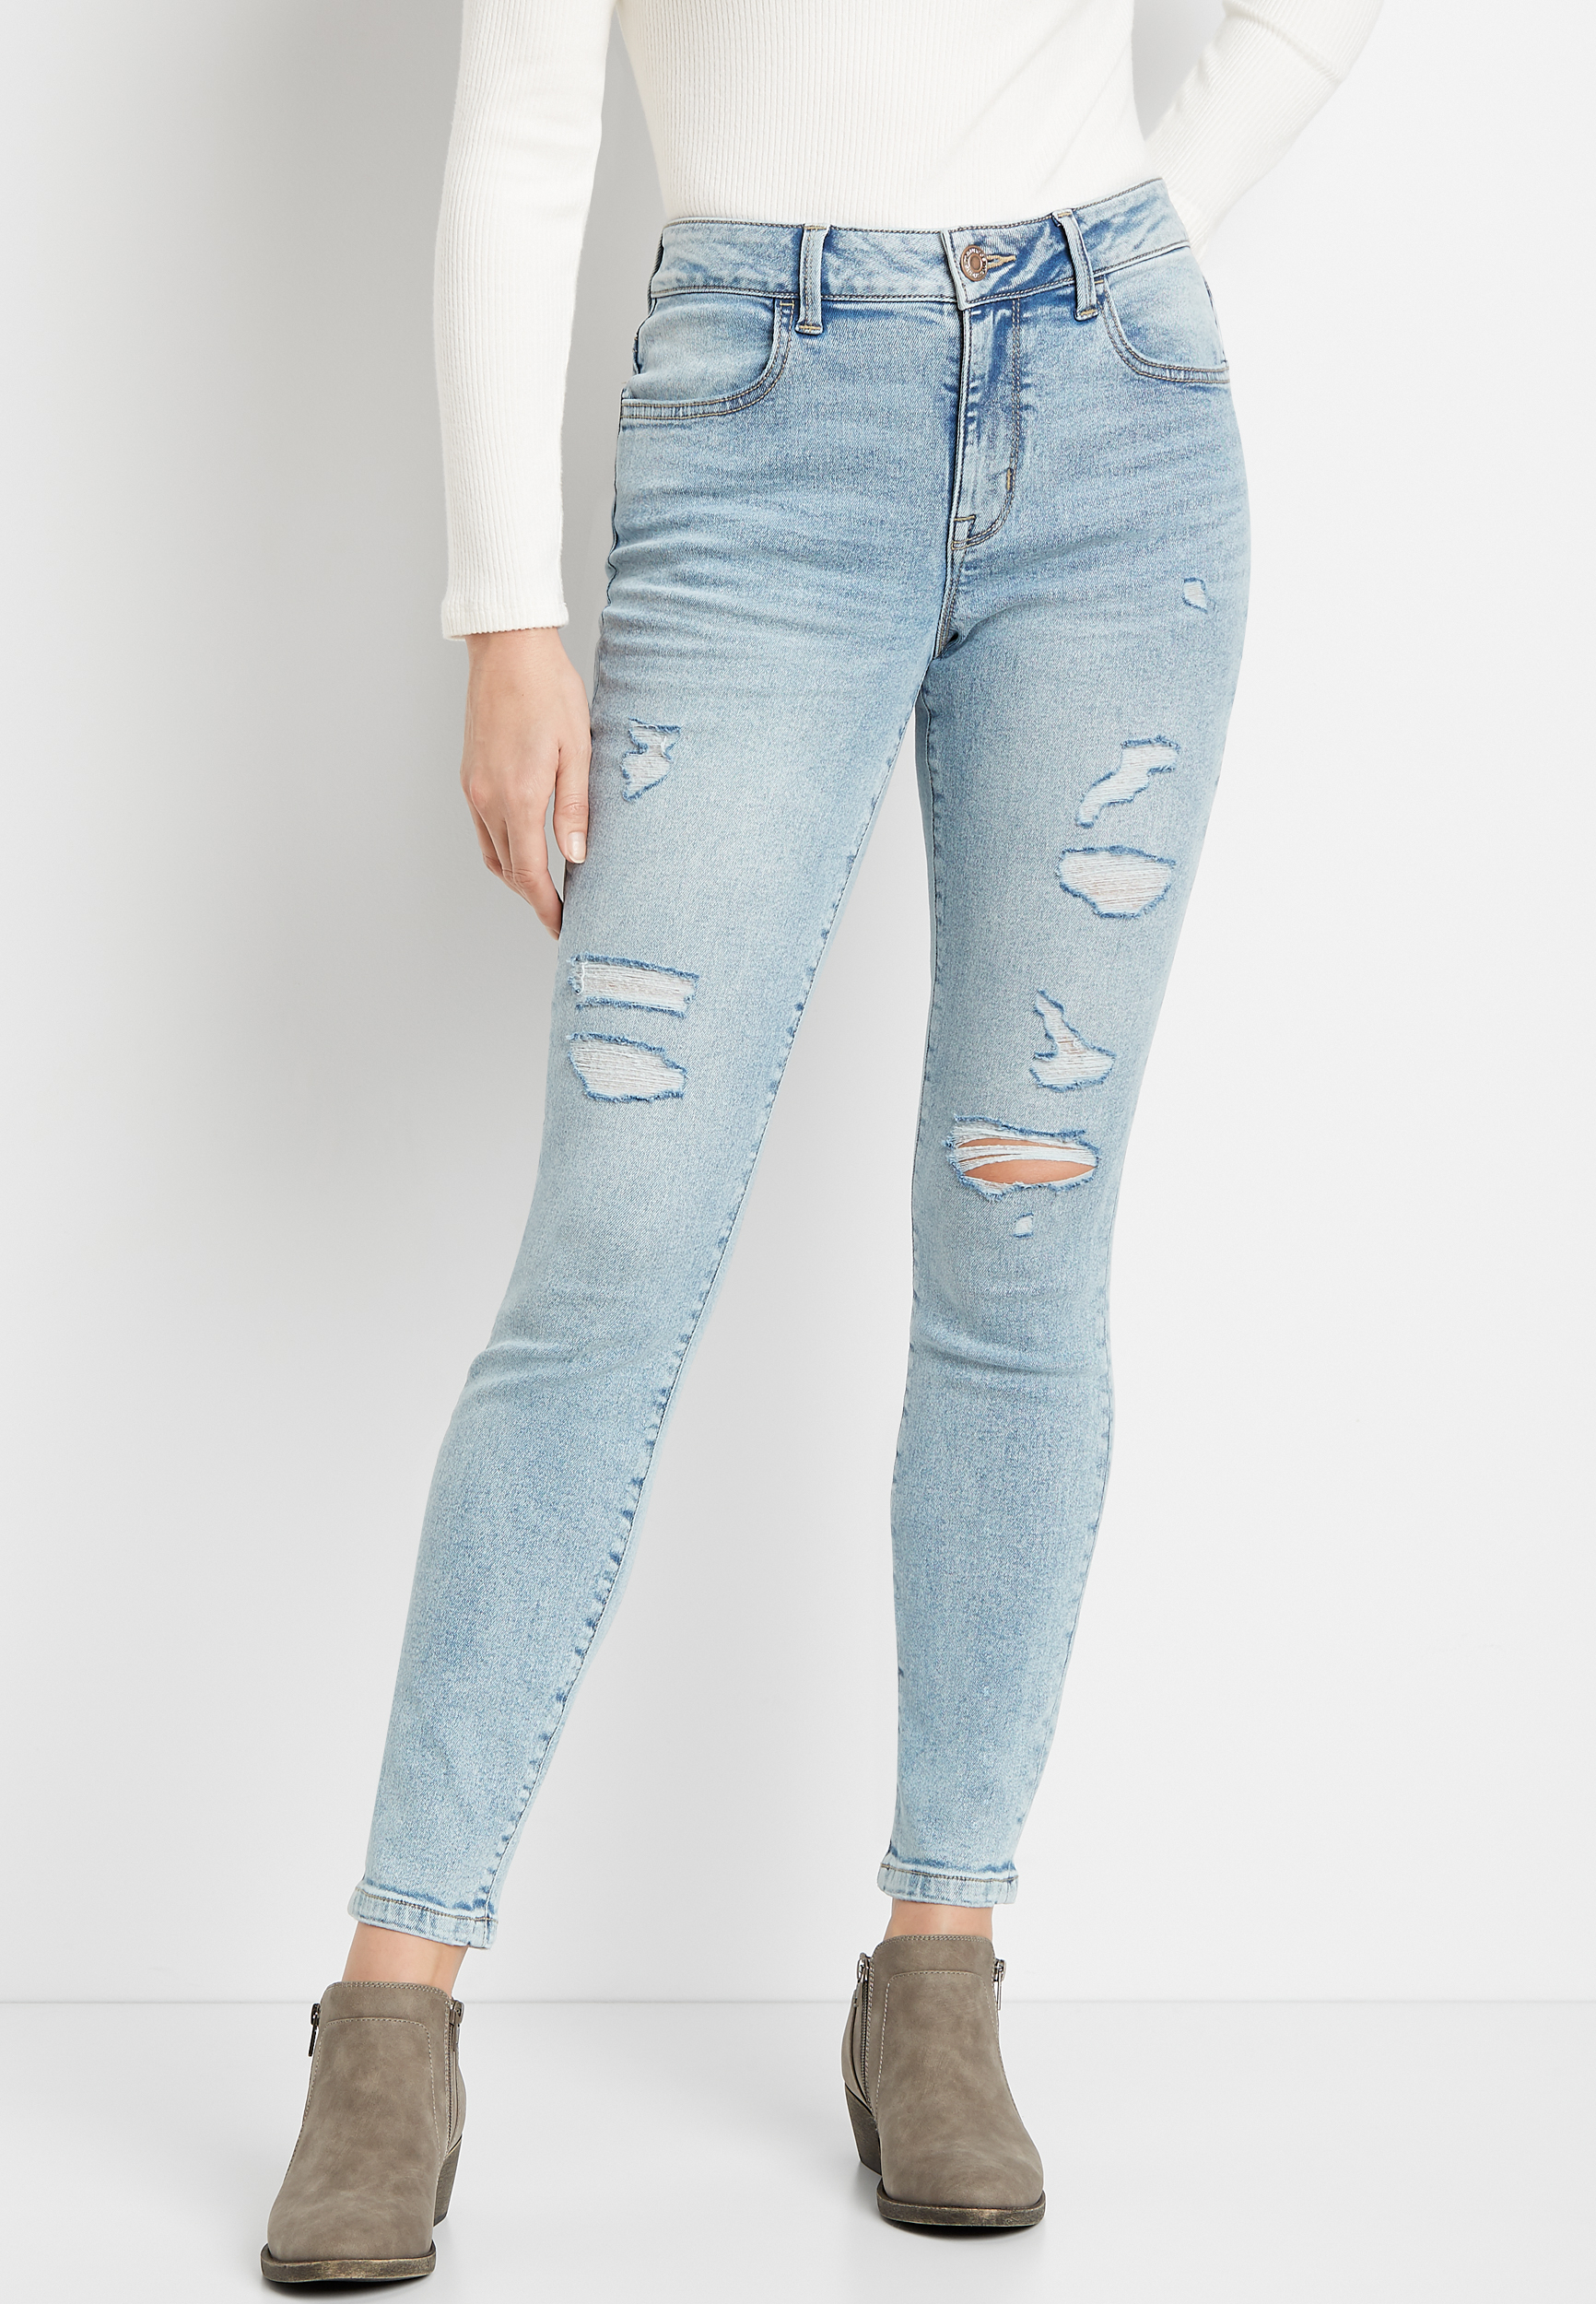 m jeans by maurices™ Vintage High Rise Ripped Jegging | maurices